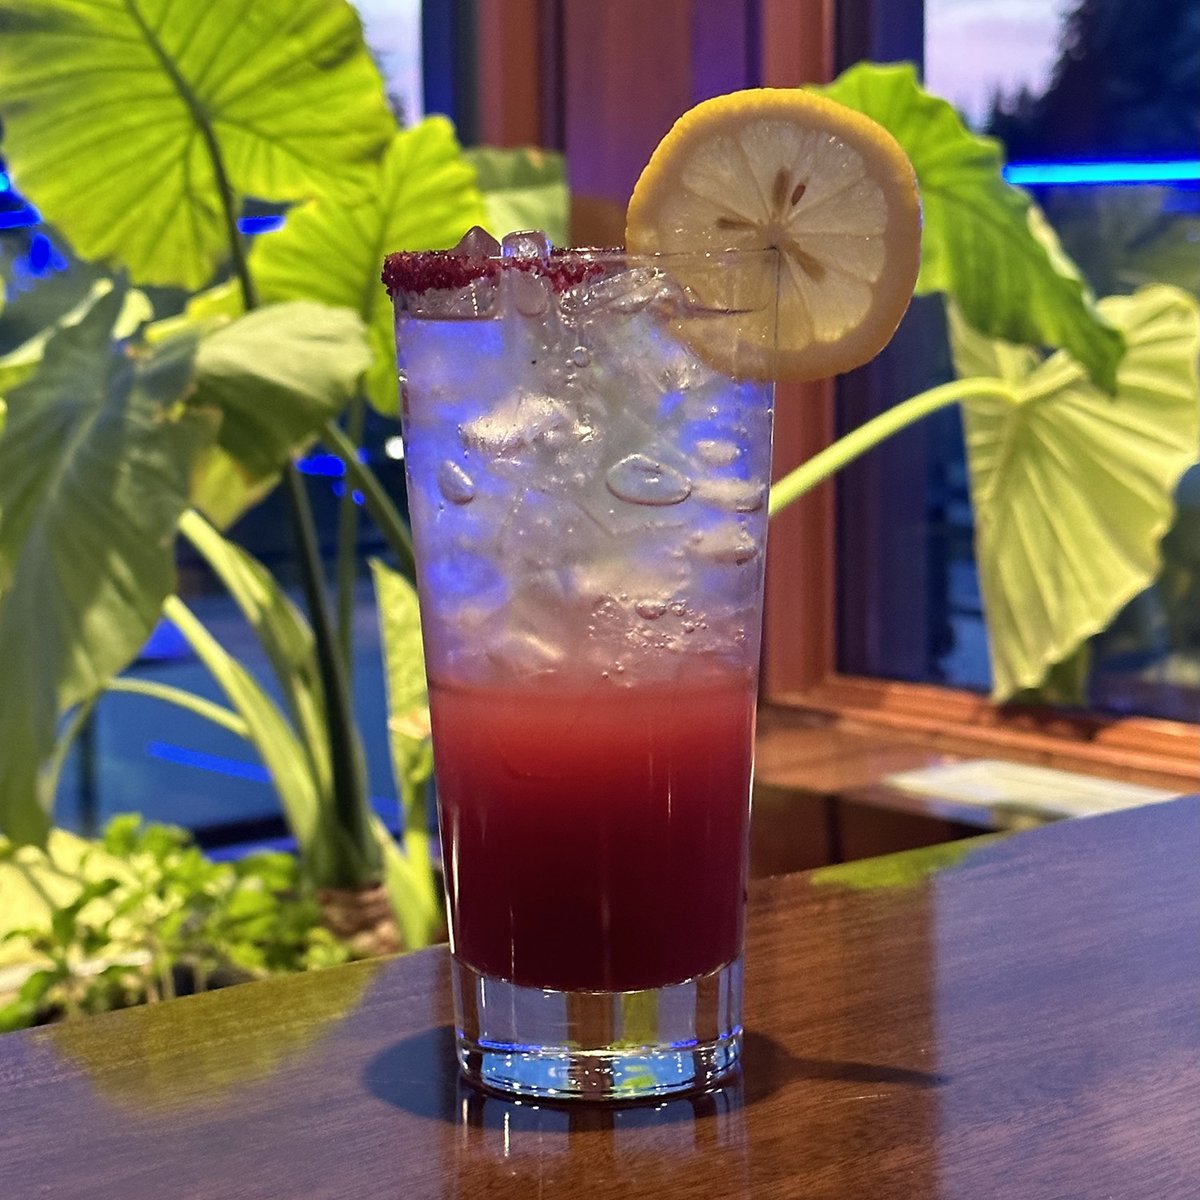 Did you know we have a Zero Proof section on our drink menu?

Order Hibiscus Lemonade to try it out!

#Hibiscus #Lemonade #HibiscusLemonade #ZeroProof #YEGdrinks #YEG